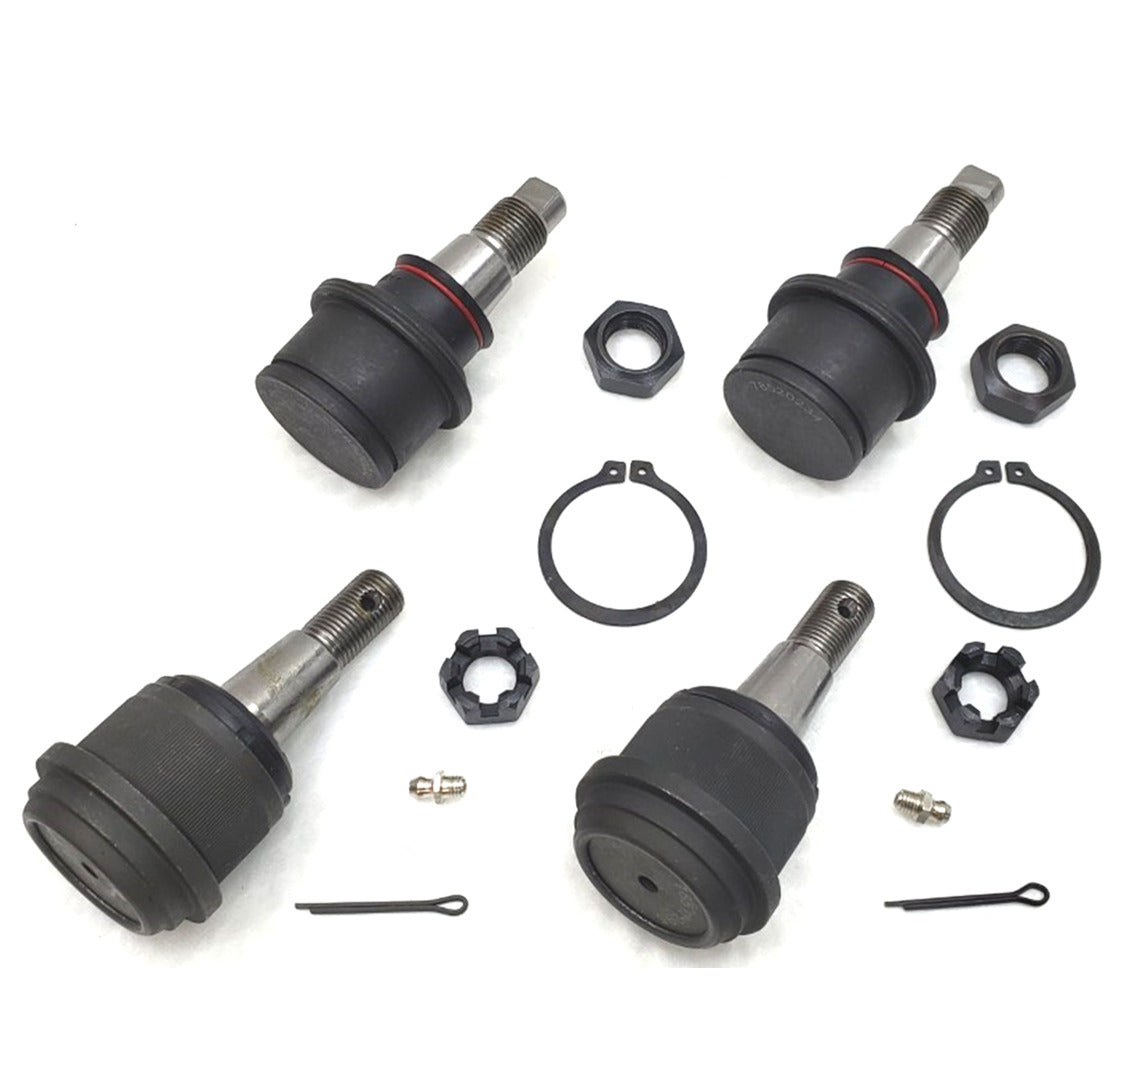 HD Dodge Ram 2500 3500 4x4 00-02 Upper and Lower Ball Joint Suspension Kit